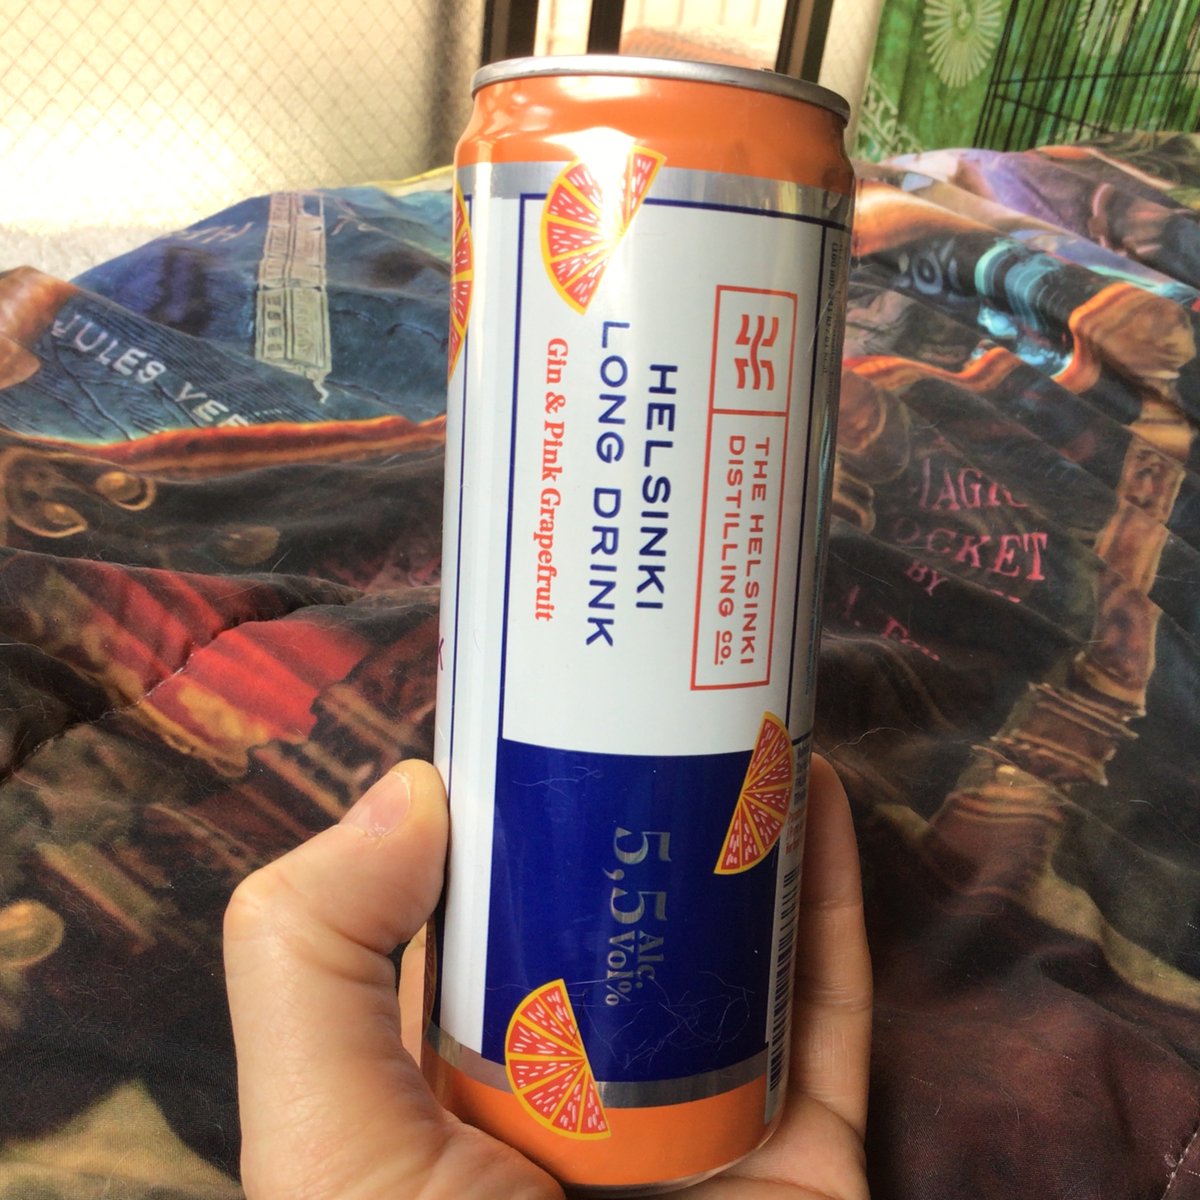 I cracked open a can of Helsinki Long Drink gin last night but fell asleep with it barely sipped. Breakfast of champions, why not! I’ll have it with my cuppa & a hearty breakfast of Next meat kalbi with curry & couscous & a sliced tomato, & watch the latest episode of Taskmaster. https://t.co/6uRhIUo9Iy